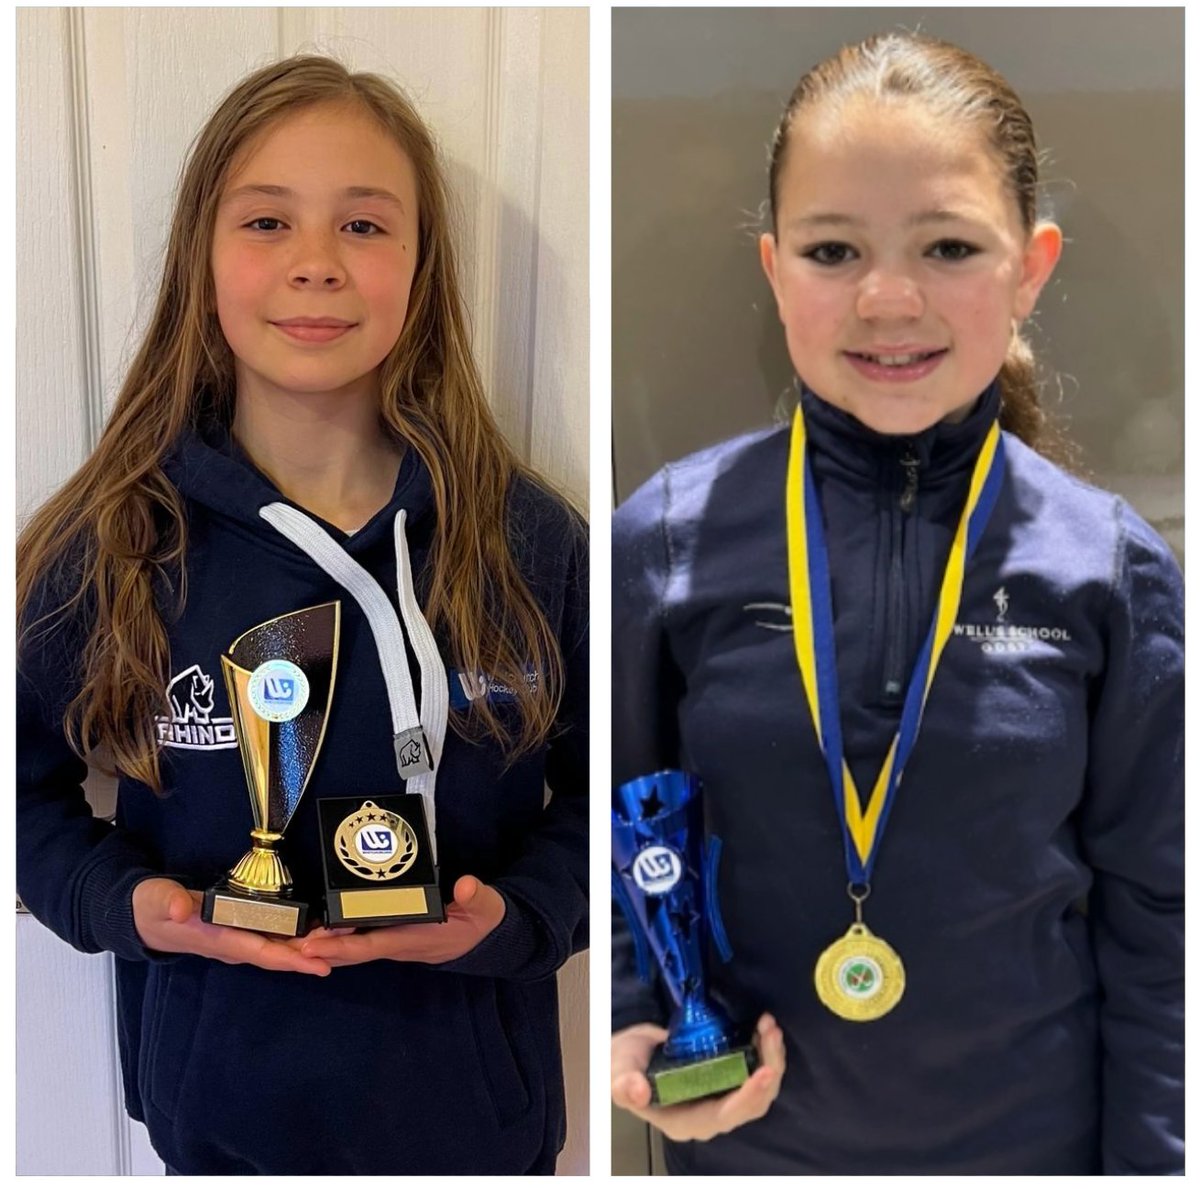 What an incredible weekend it was for Howell's girls at Whitchurch Hockey Club! 🌟🏑 To discover more about the remarkable achievements of Felicity, Jessica, Josey, and Lily, both on and off the pitch, please visit the link below. Learn more: howells-cardiff.gdst.net/news-article/h…